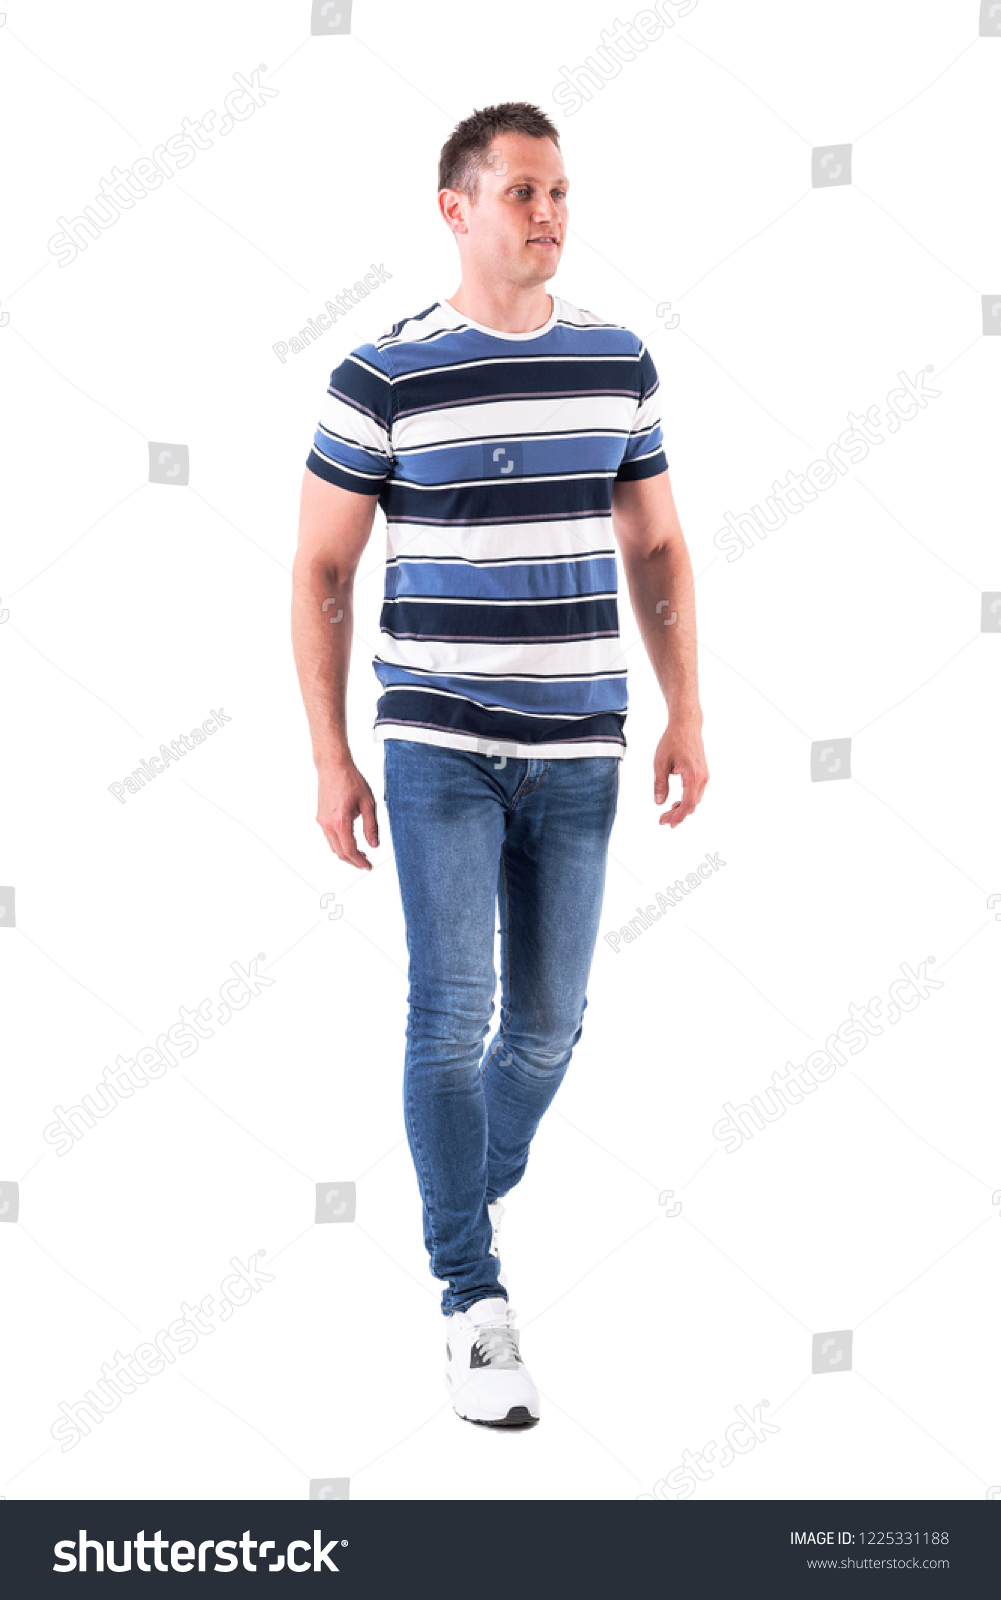 Cool relaxed casual man wearing t-shirt and jeans walking casually. Full body isolated on white background.  #1225331188